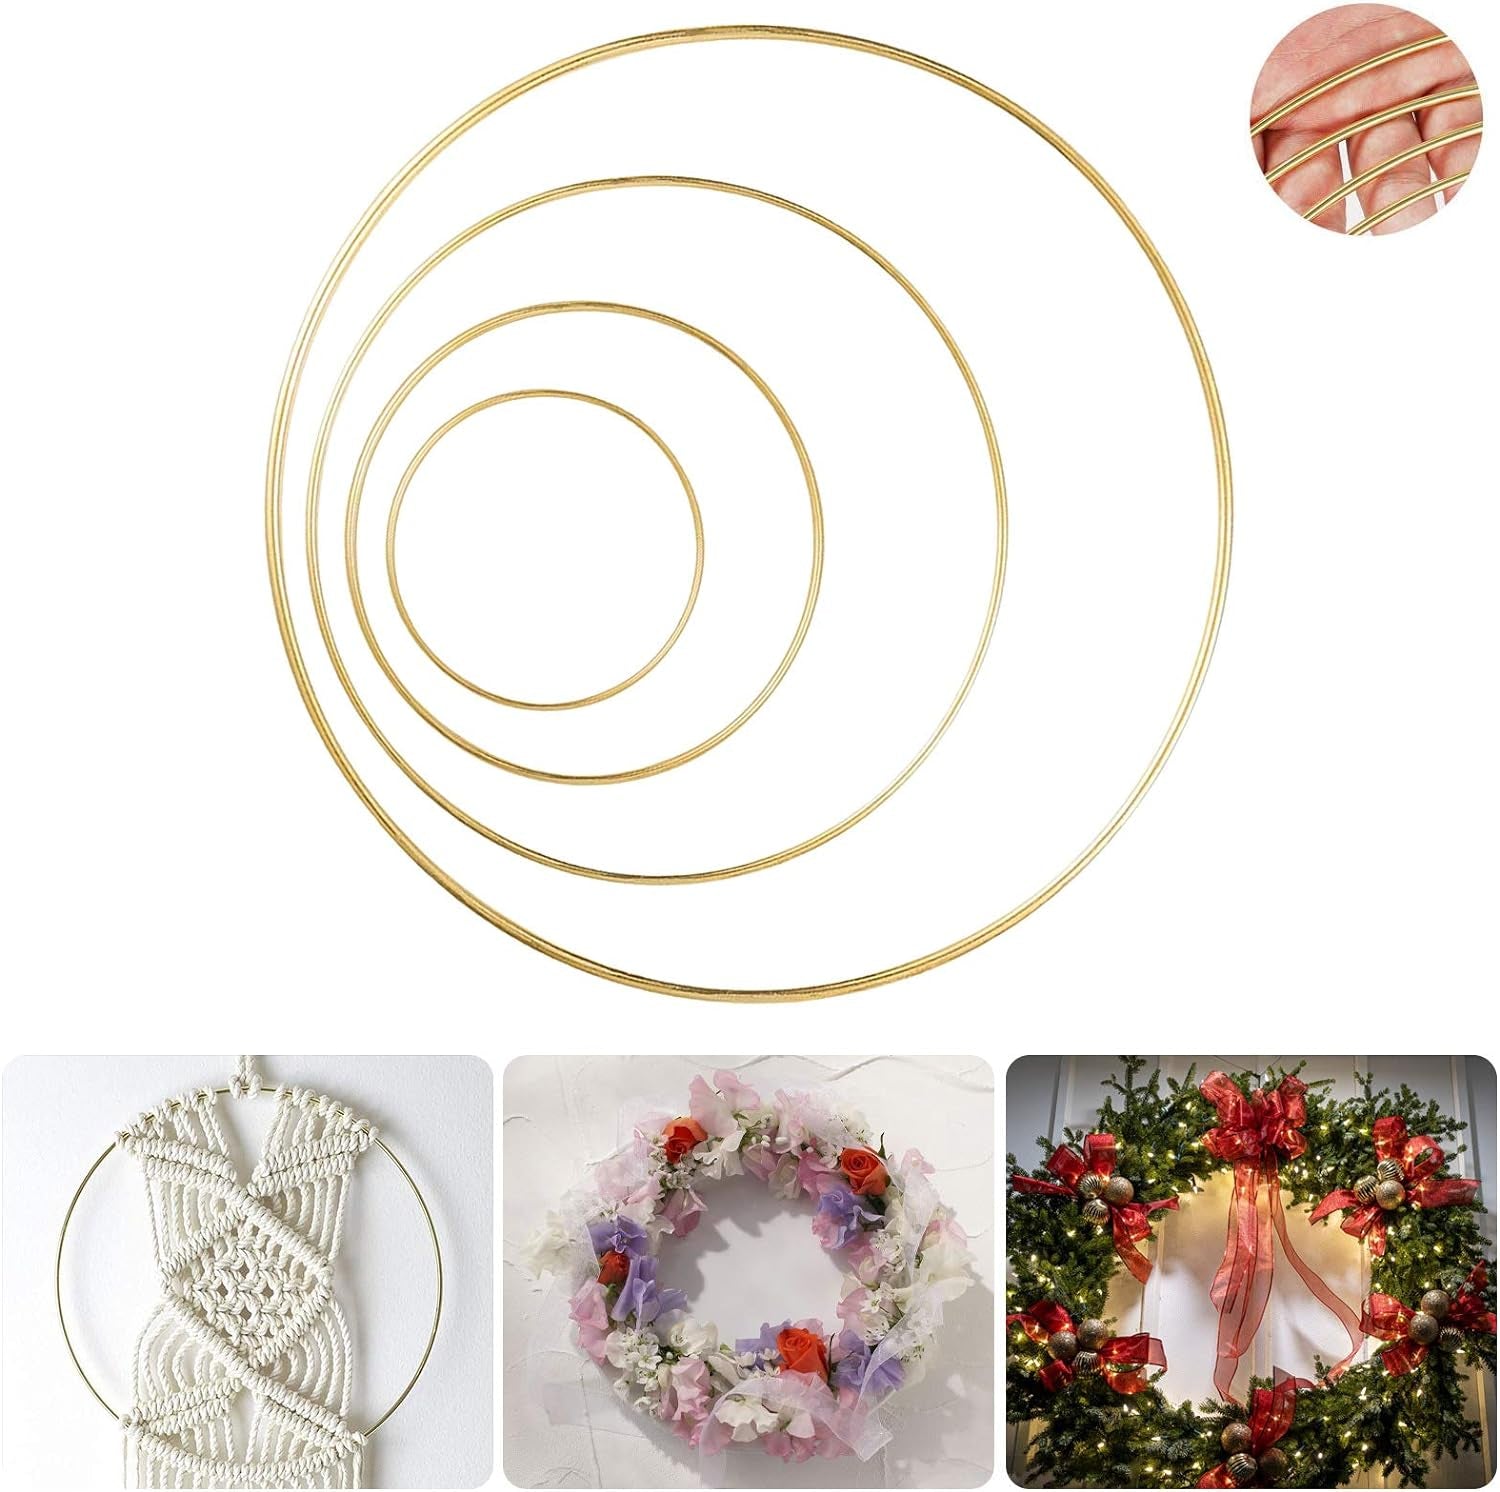 8 Pack Large Metal Floral Hoop Wreath Macrame Gold Hoop Rings(6 Inch8 Inch10 Inch 12 Inch) for Making Wedding Wreath Decor and DIY Dream Catcher Wall Hanging Crafts-Gold